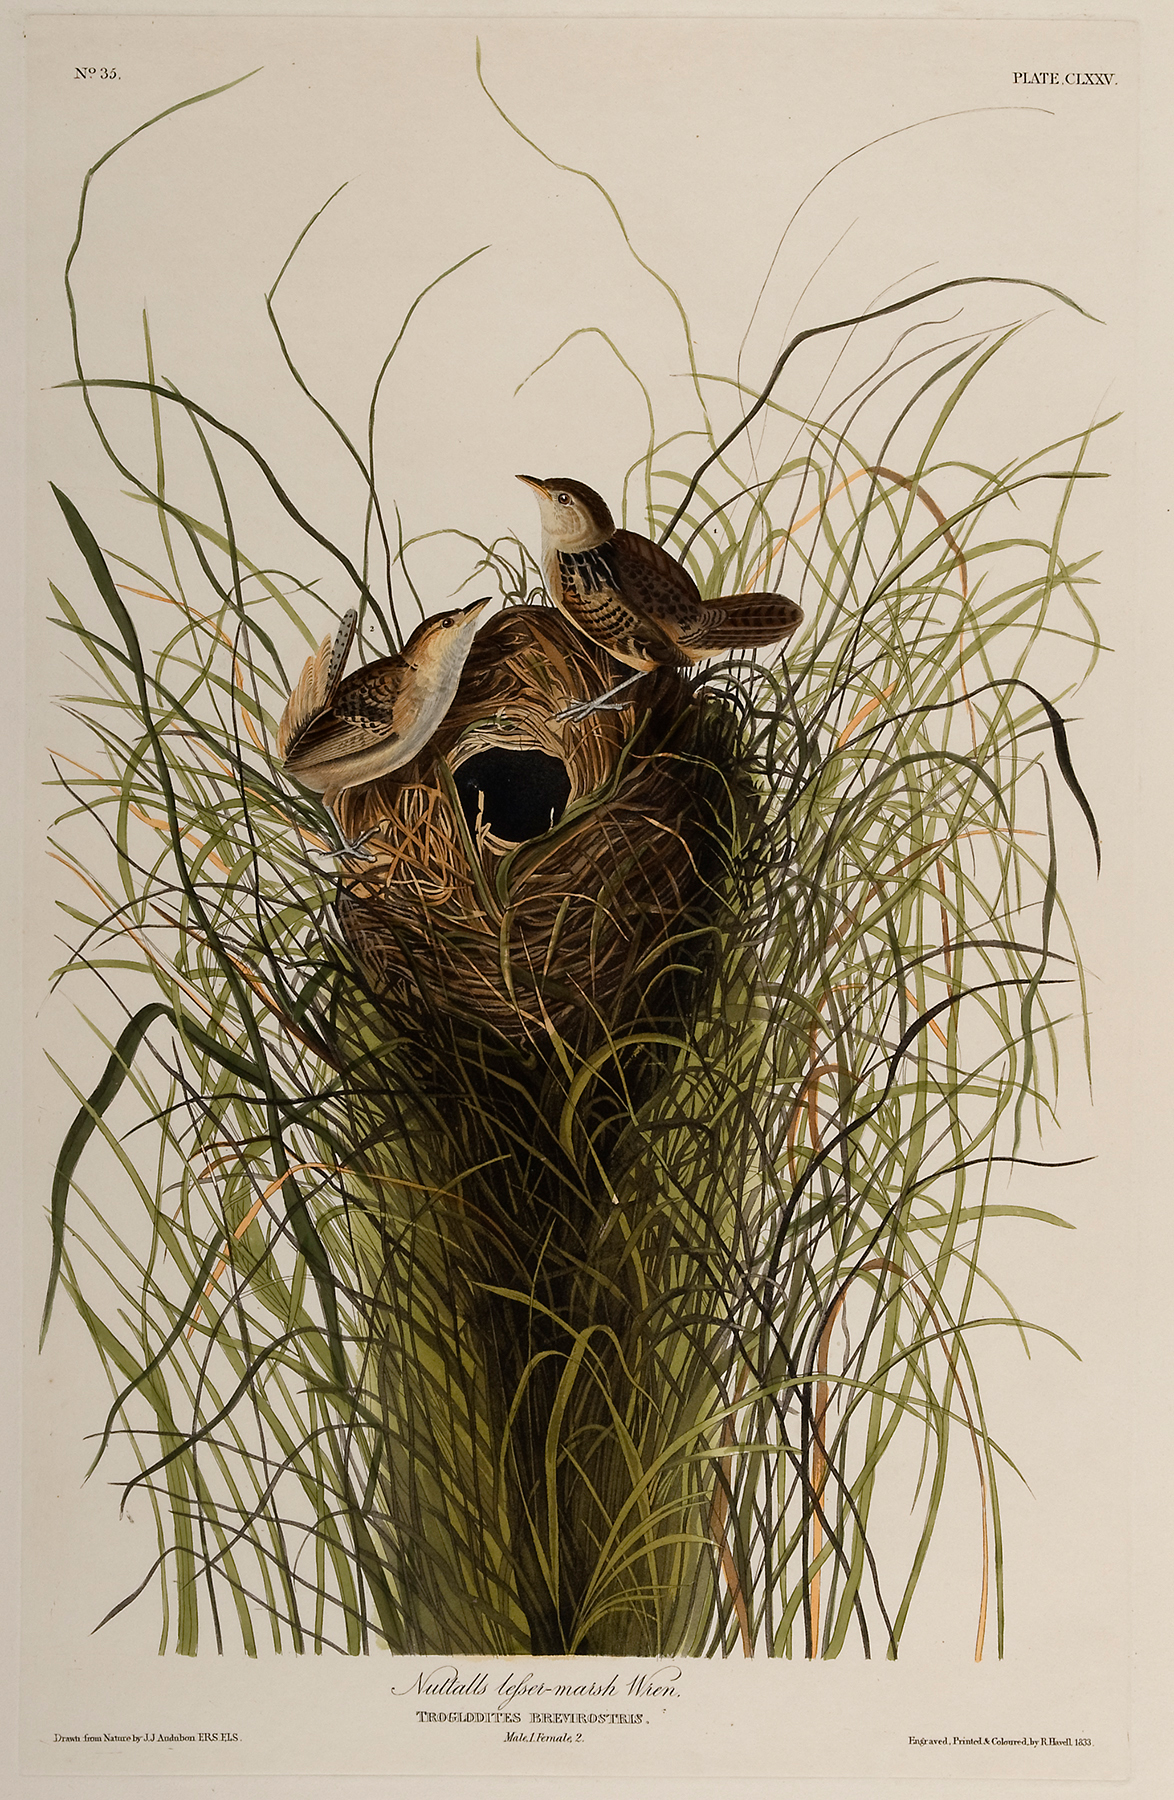 Two wrens build a nest.